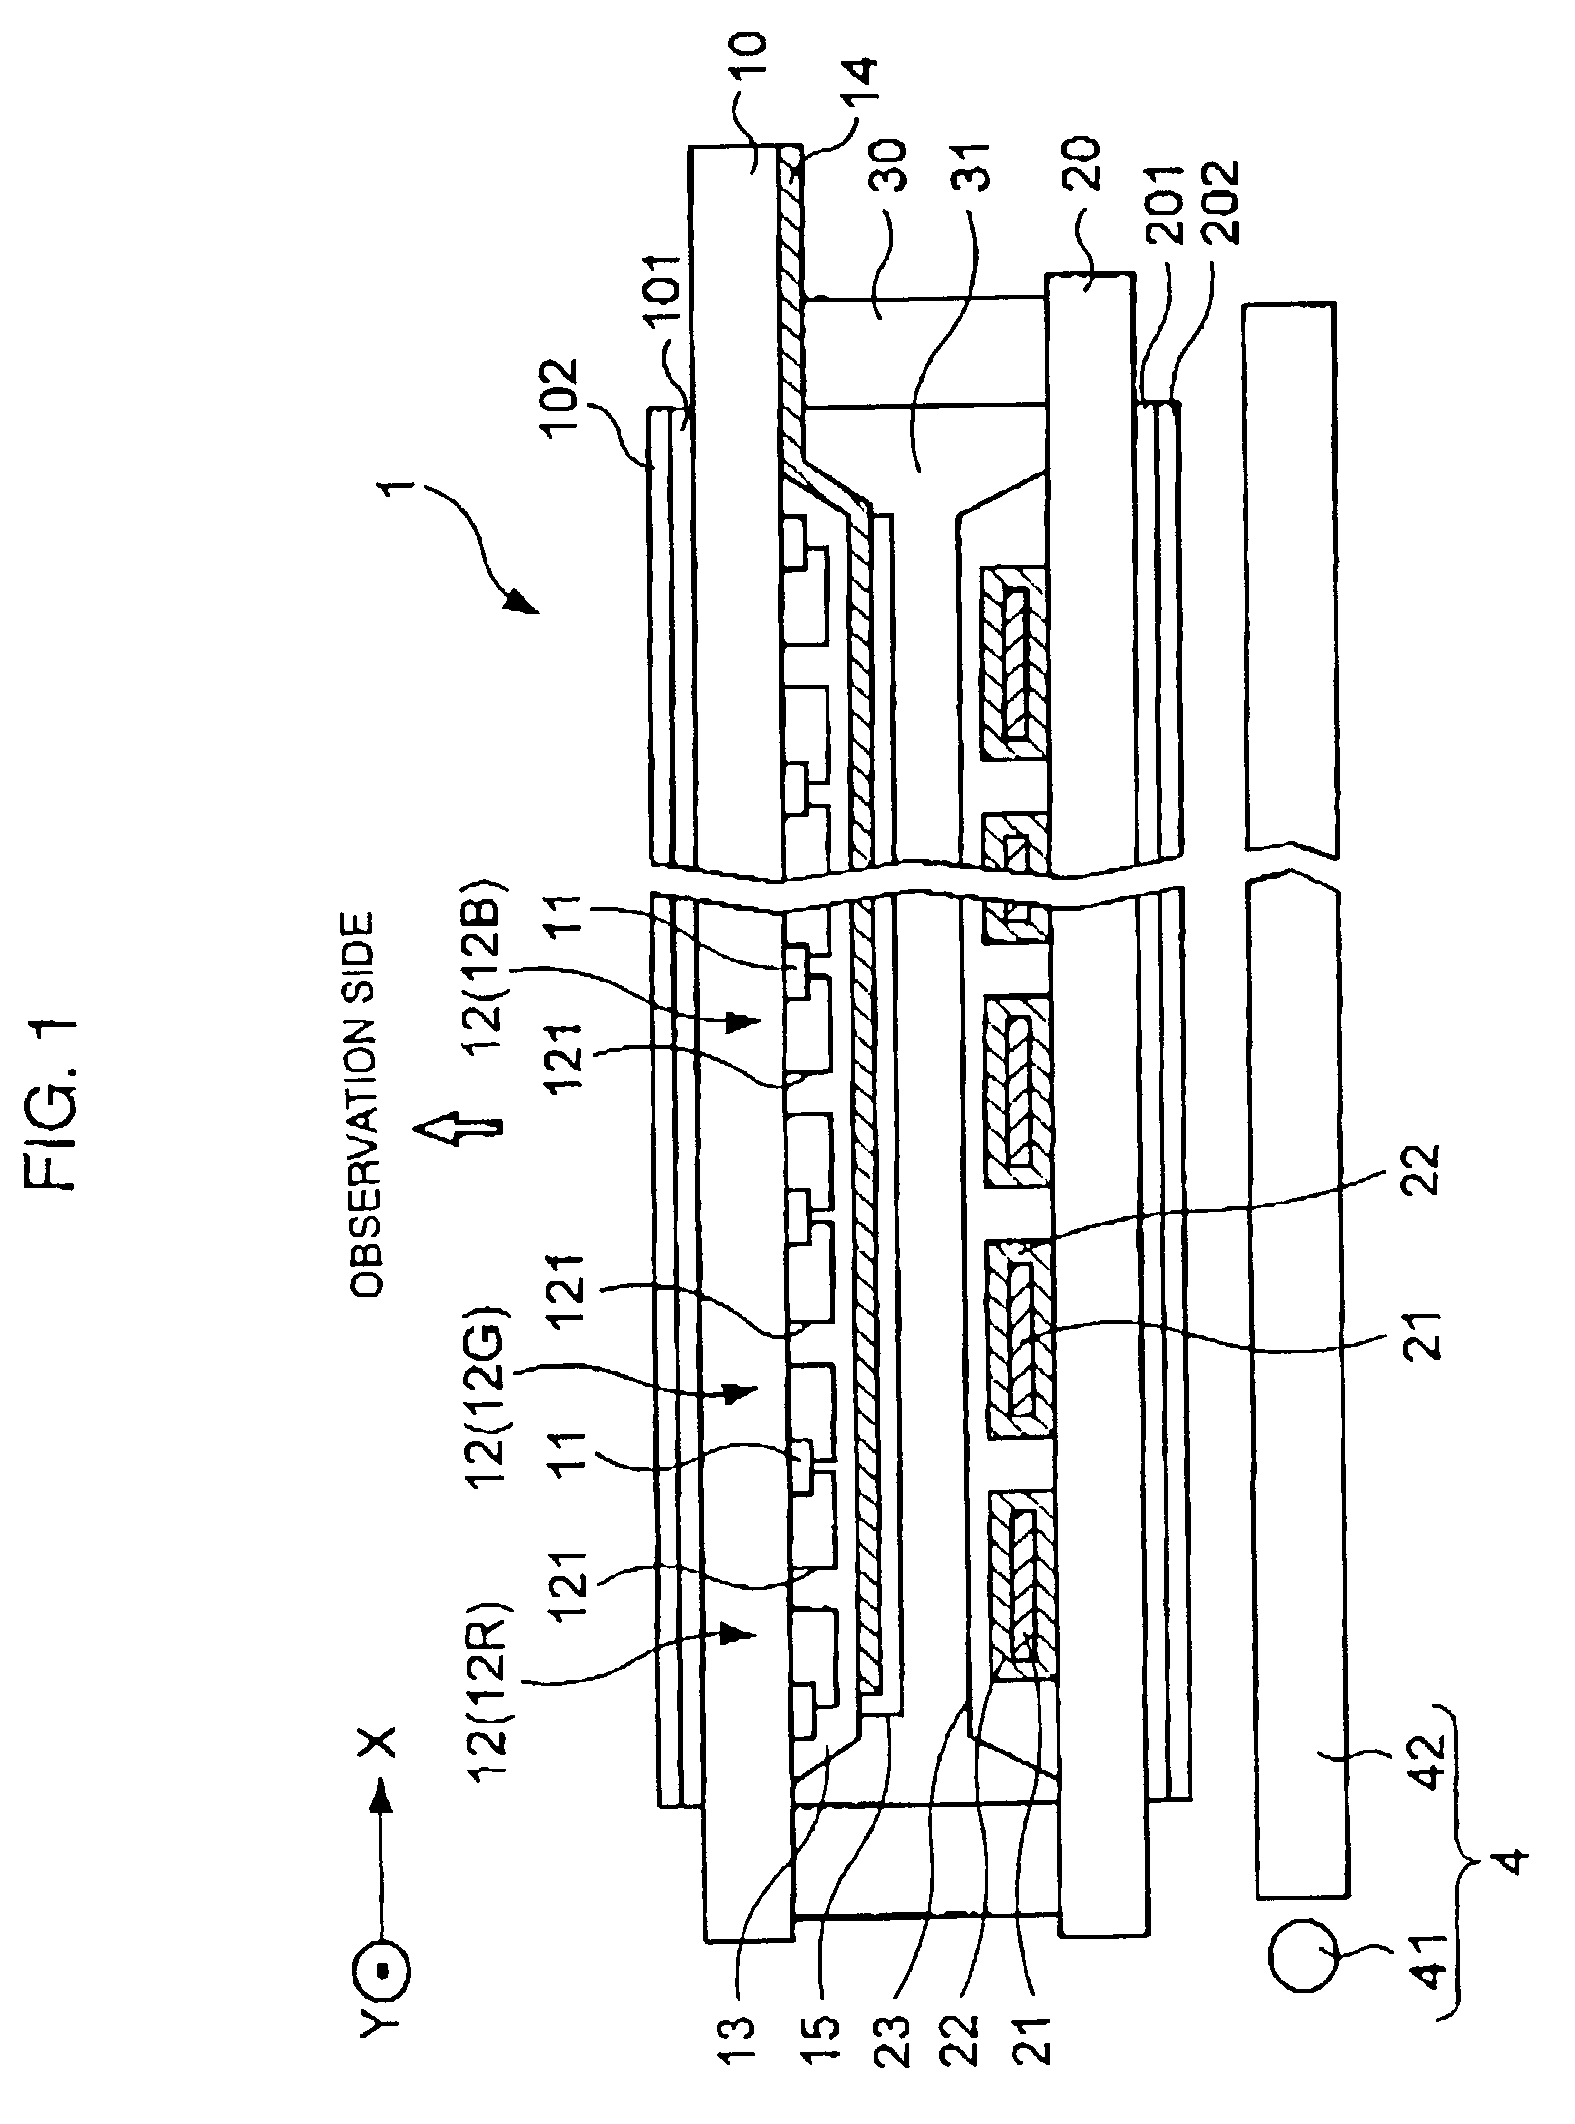 Liquid crystal display device, substrate assembly for liquid crystal display device, and electronic apparatus having a substantially equivalent display quality in both transmissive and reflective display modes